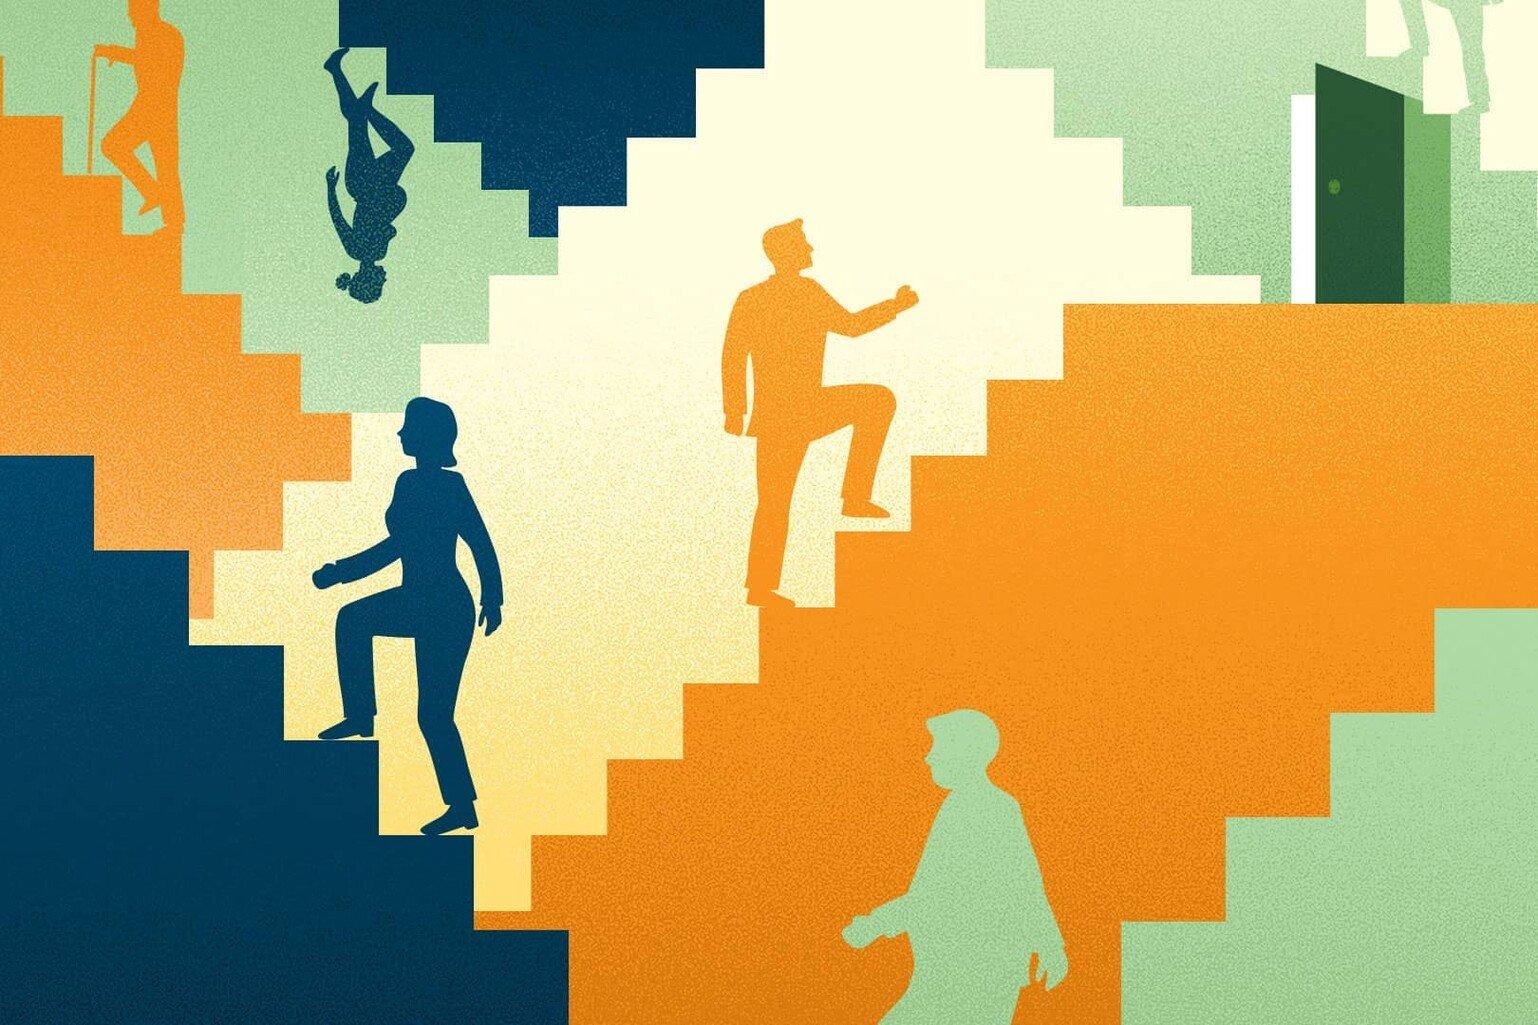 A series of illustrated researchers are walking up and down colourful staircases.